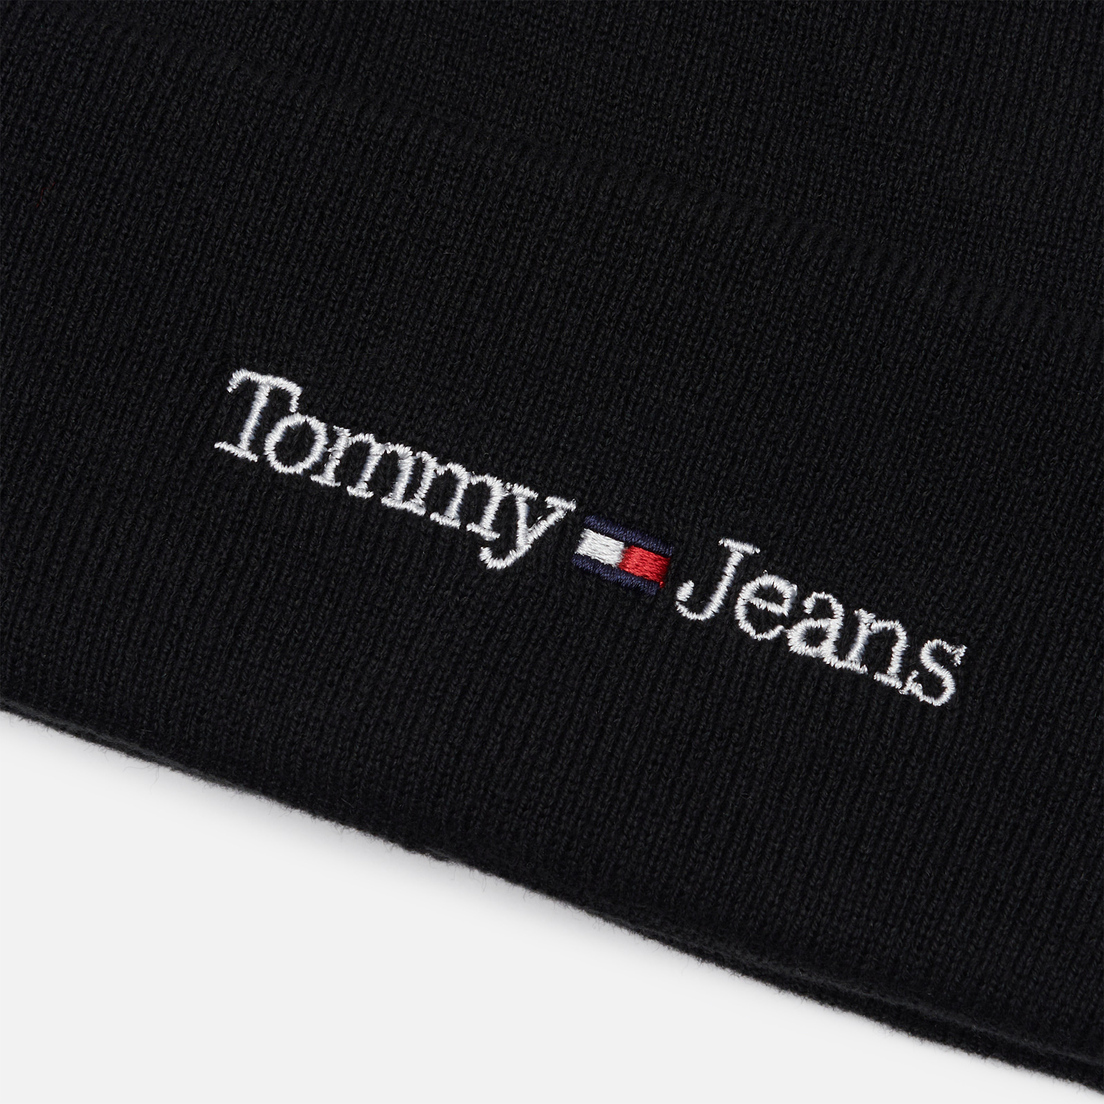 Tommy Jeans Шапка Logo Embroidery